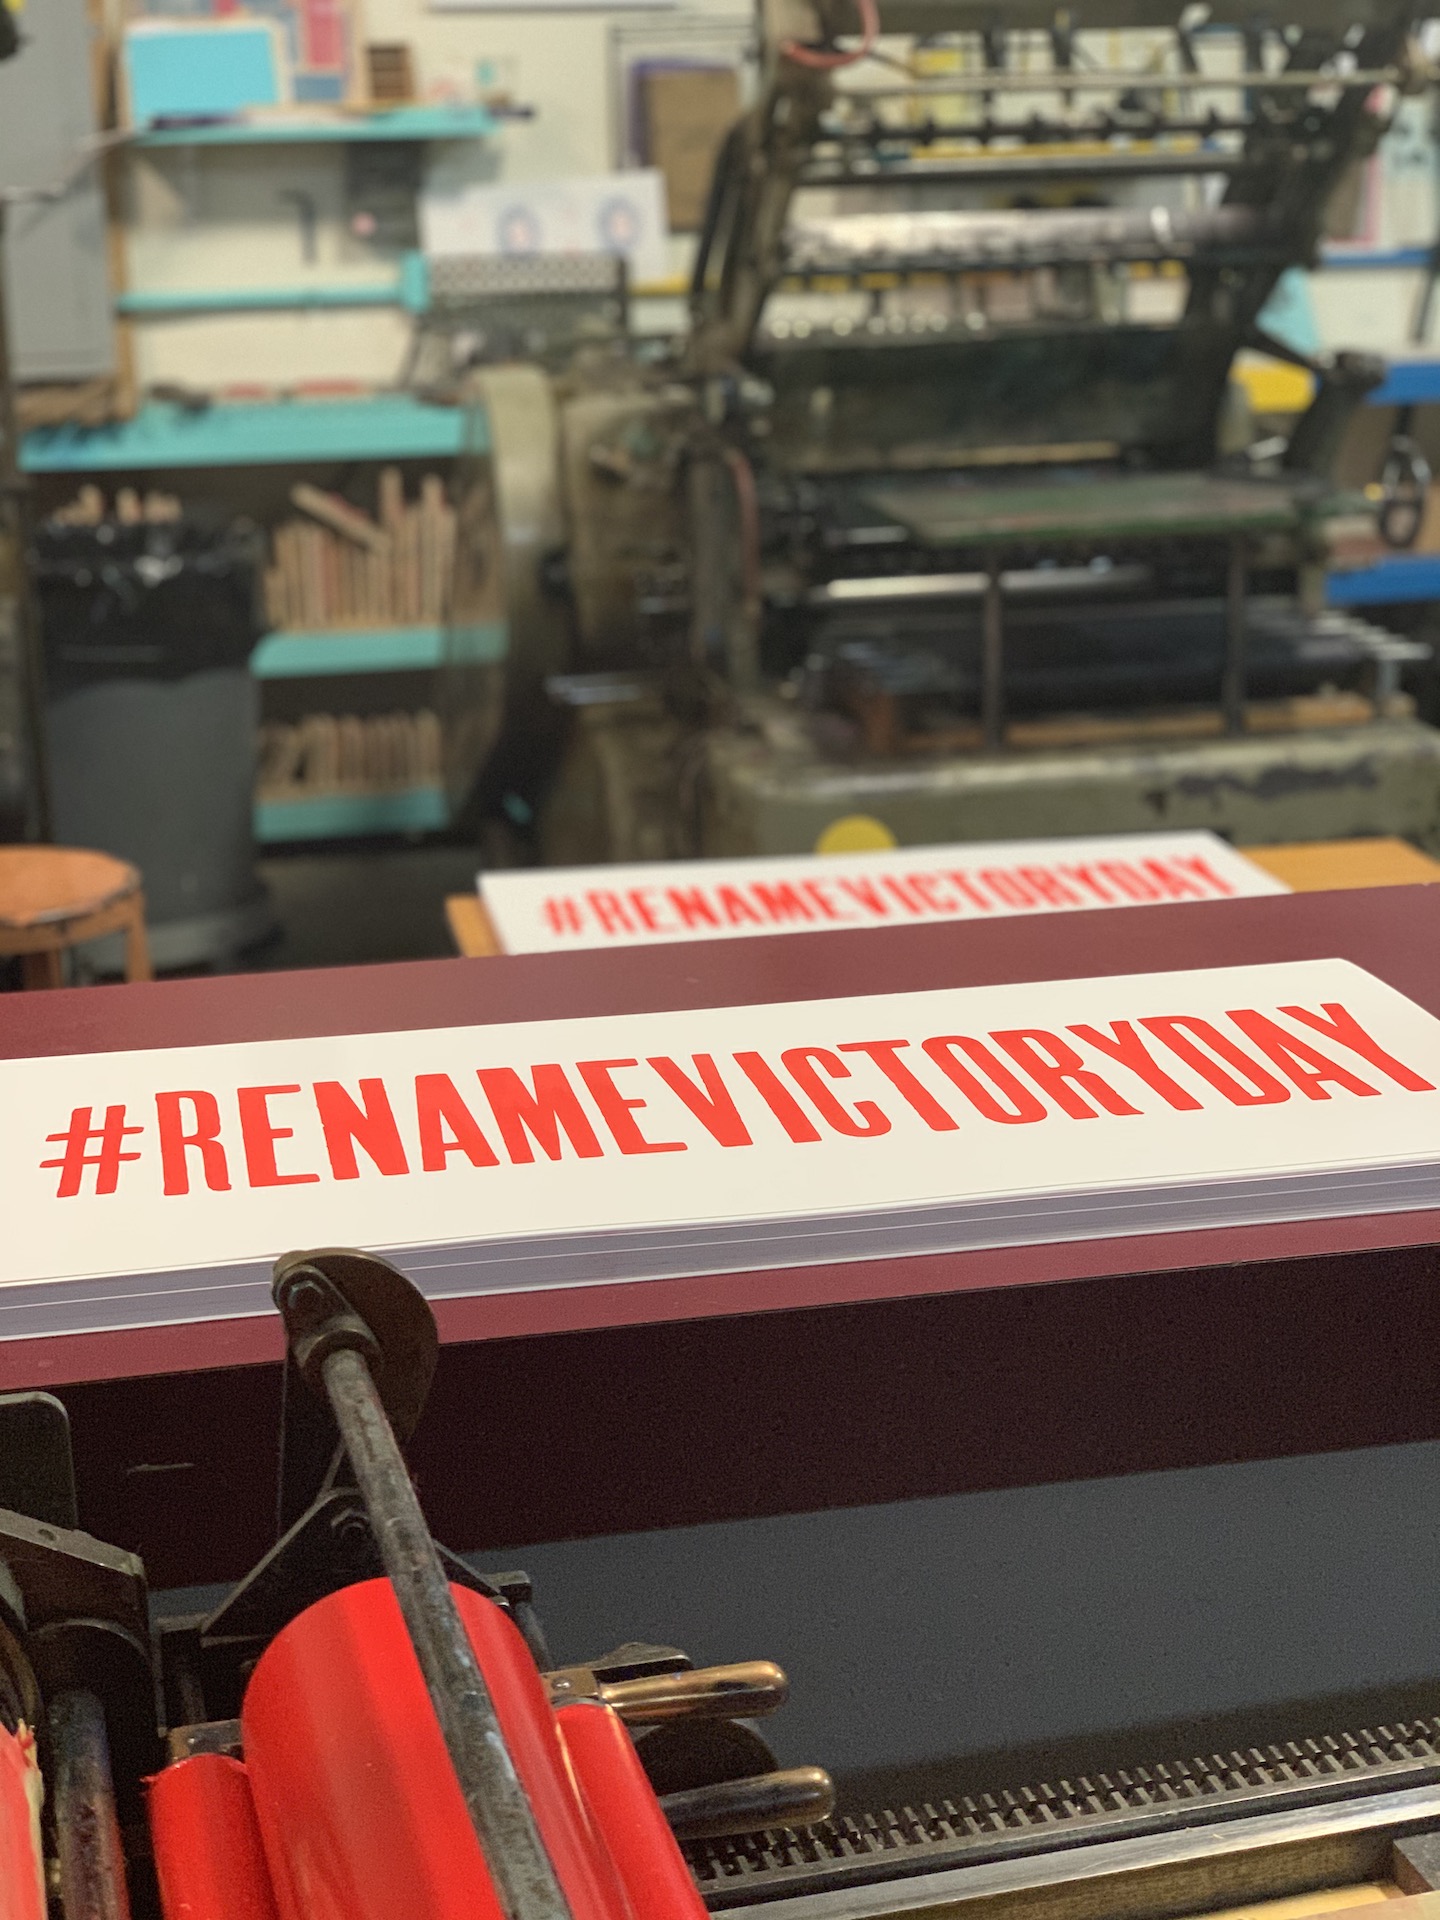 Victory Day by Lois Harada Small hashtag print "#RenameVictoryDay" set in a letterpress studio